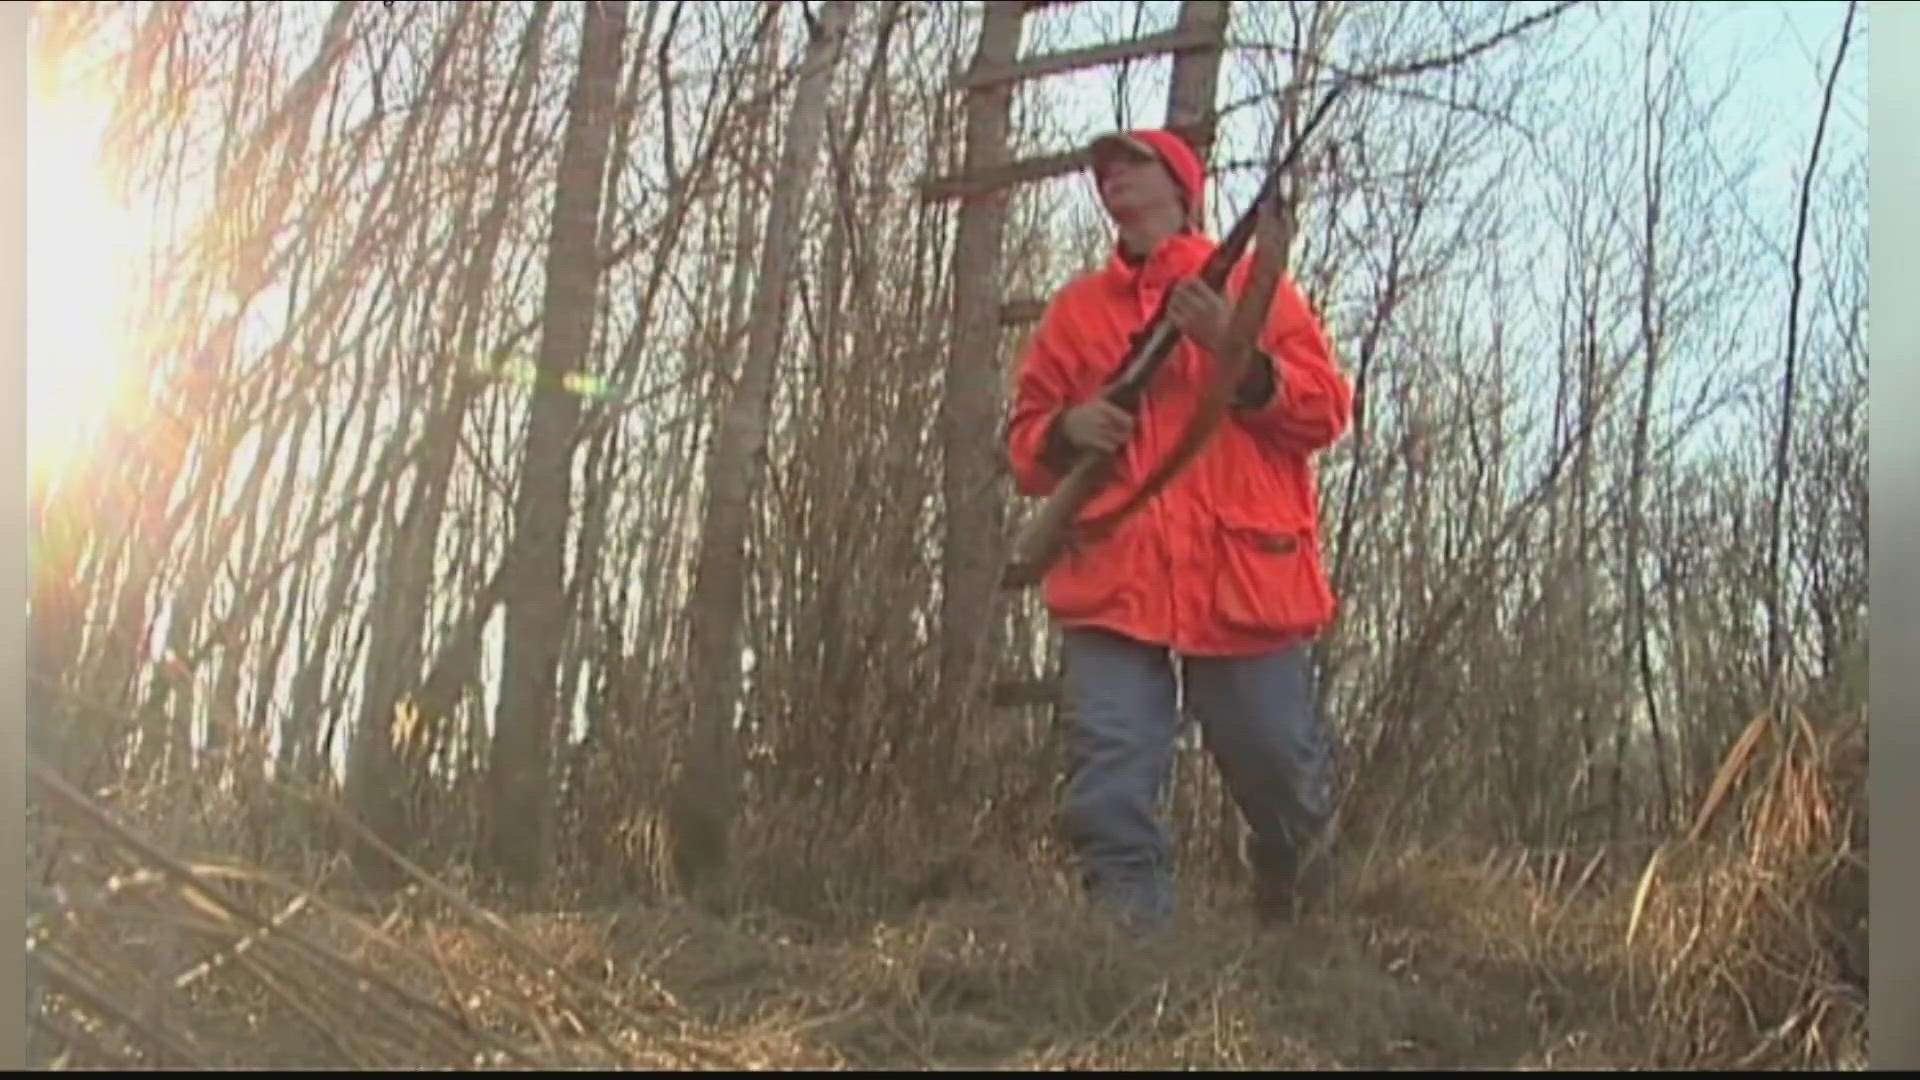 A state bill, if passed, would ban wildlife contests in NY.